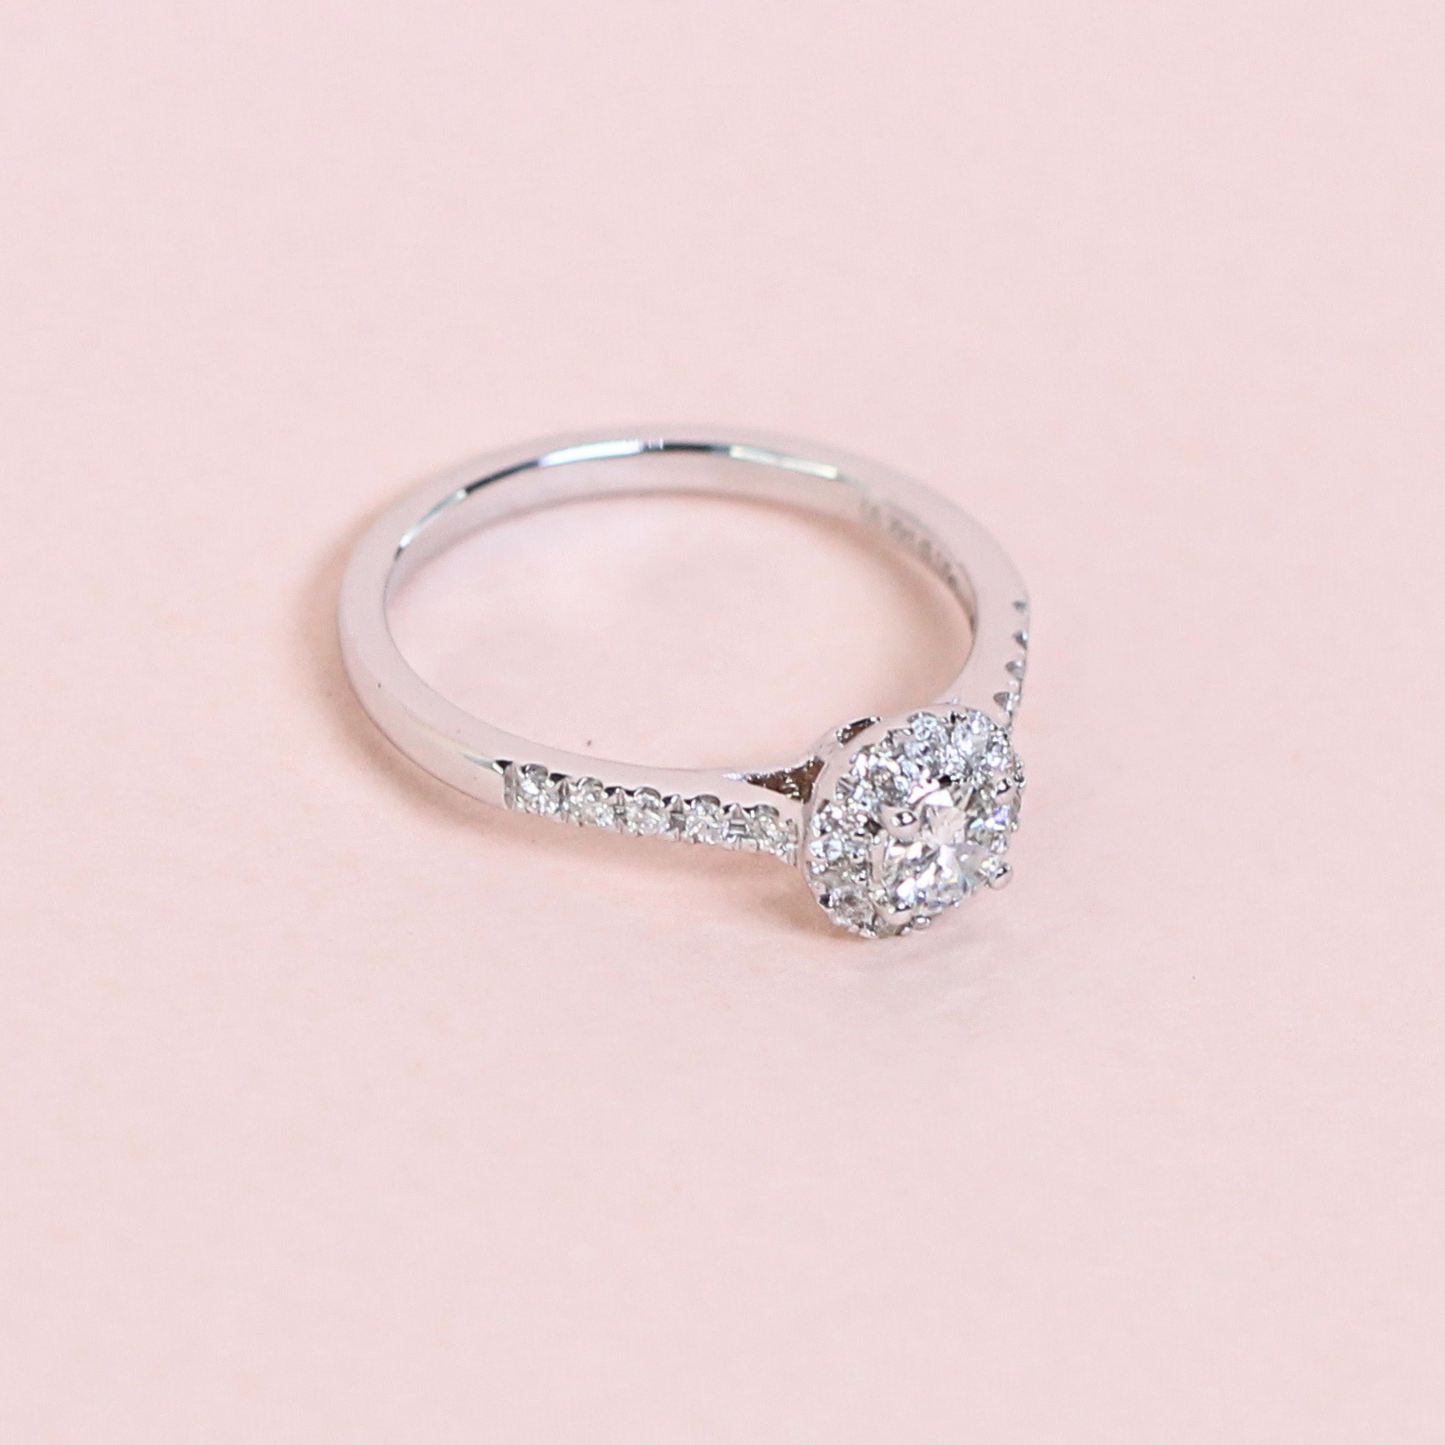 .20ct Round diamond ring with Halo in Pave setting